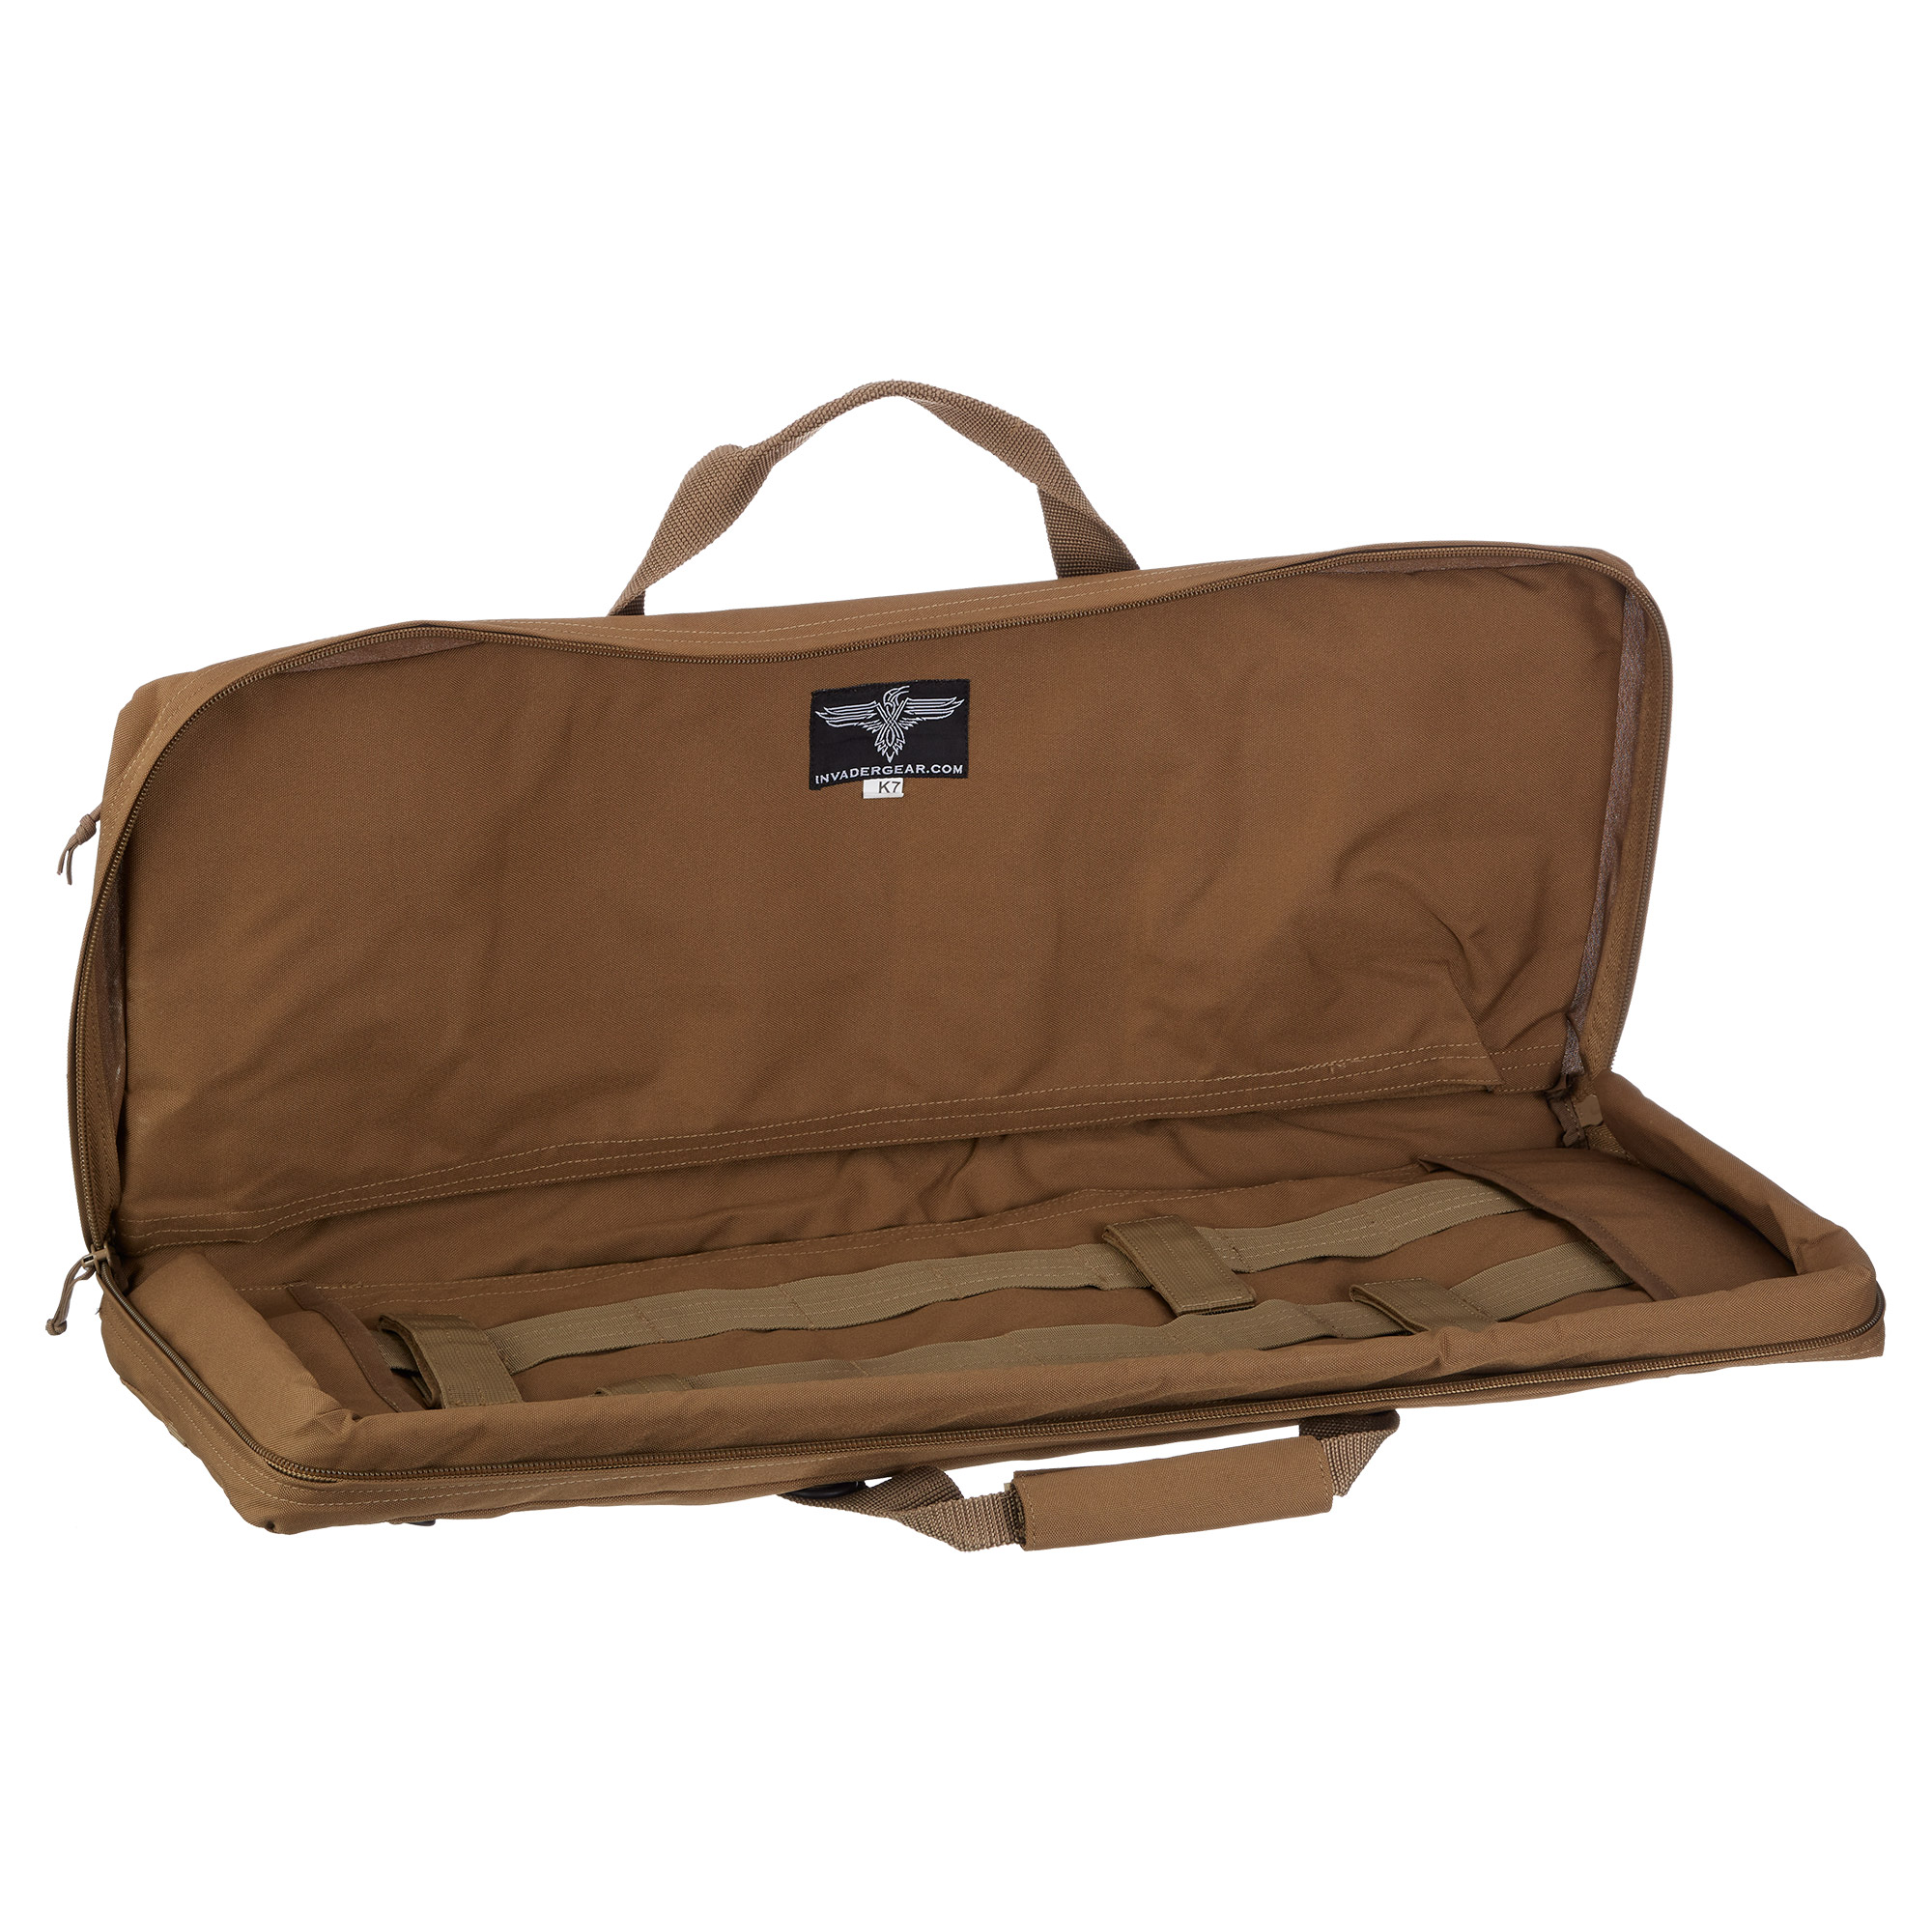 Purchase the Invader Gear Padded Rifle Carrier 80 cm tan by ASMC